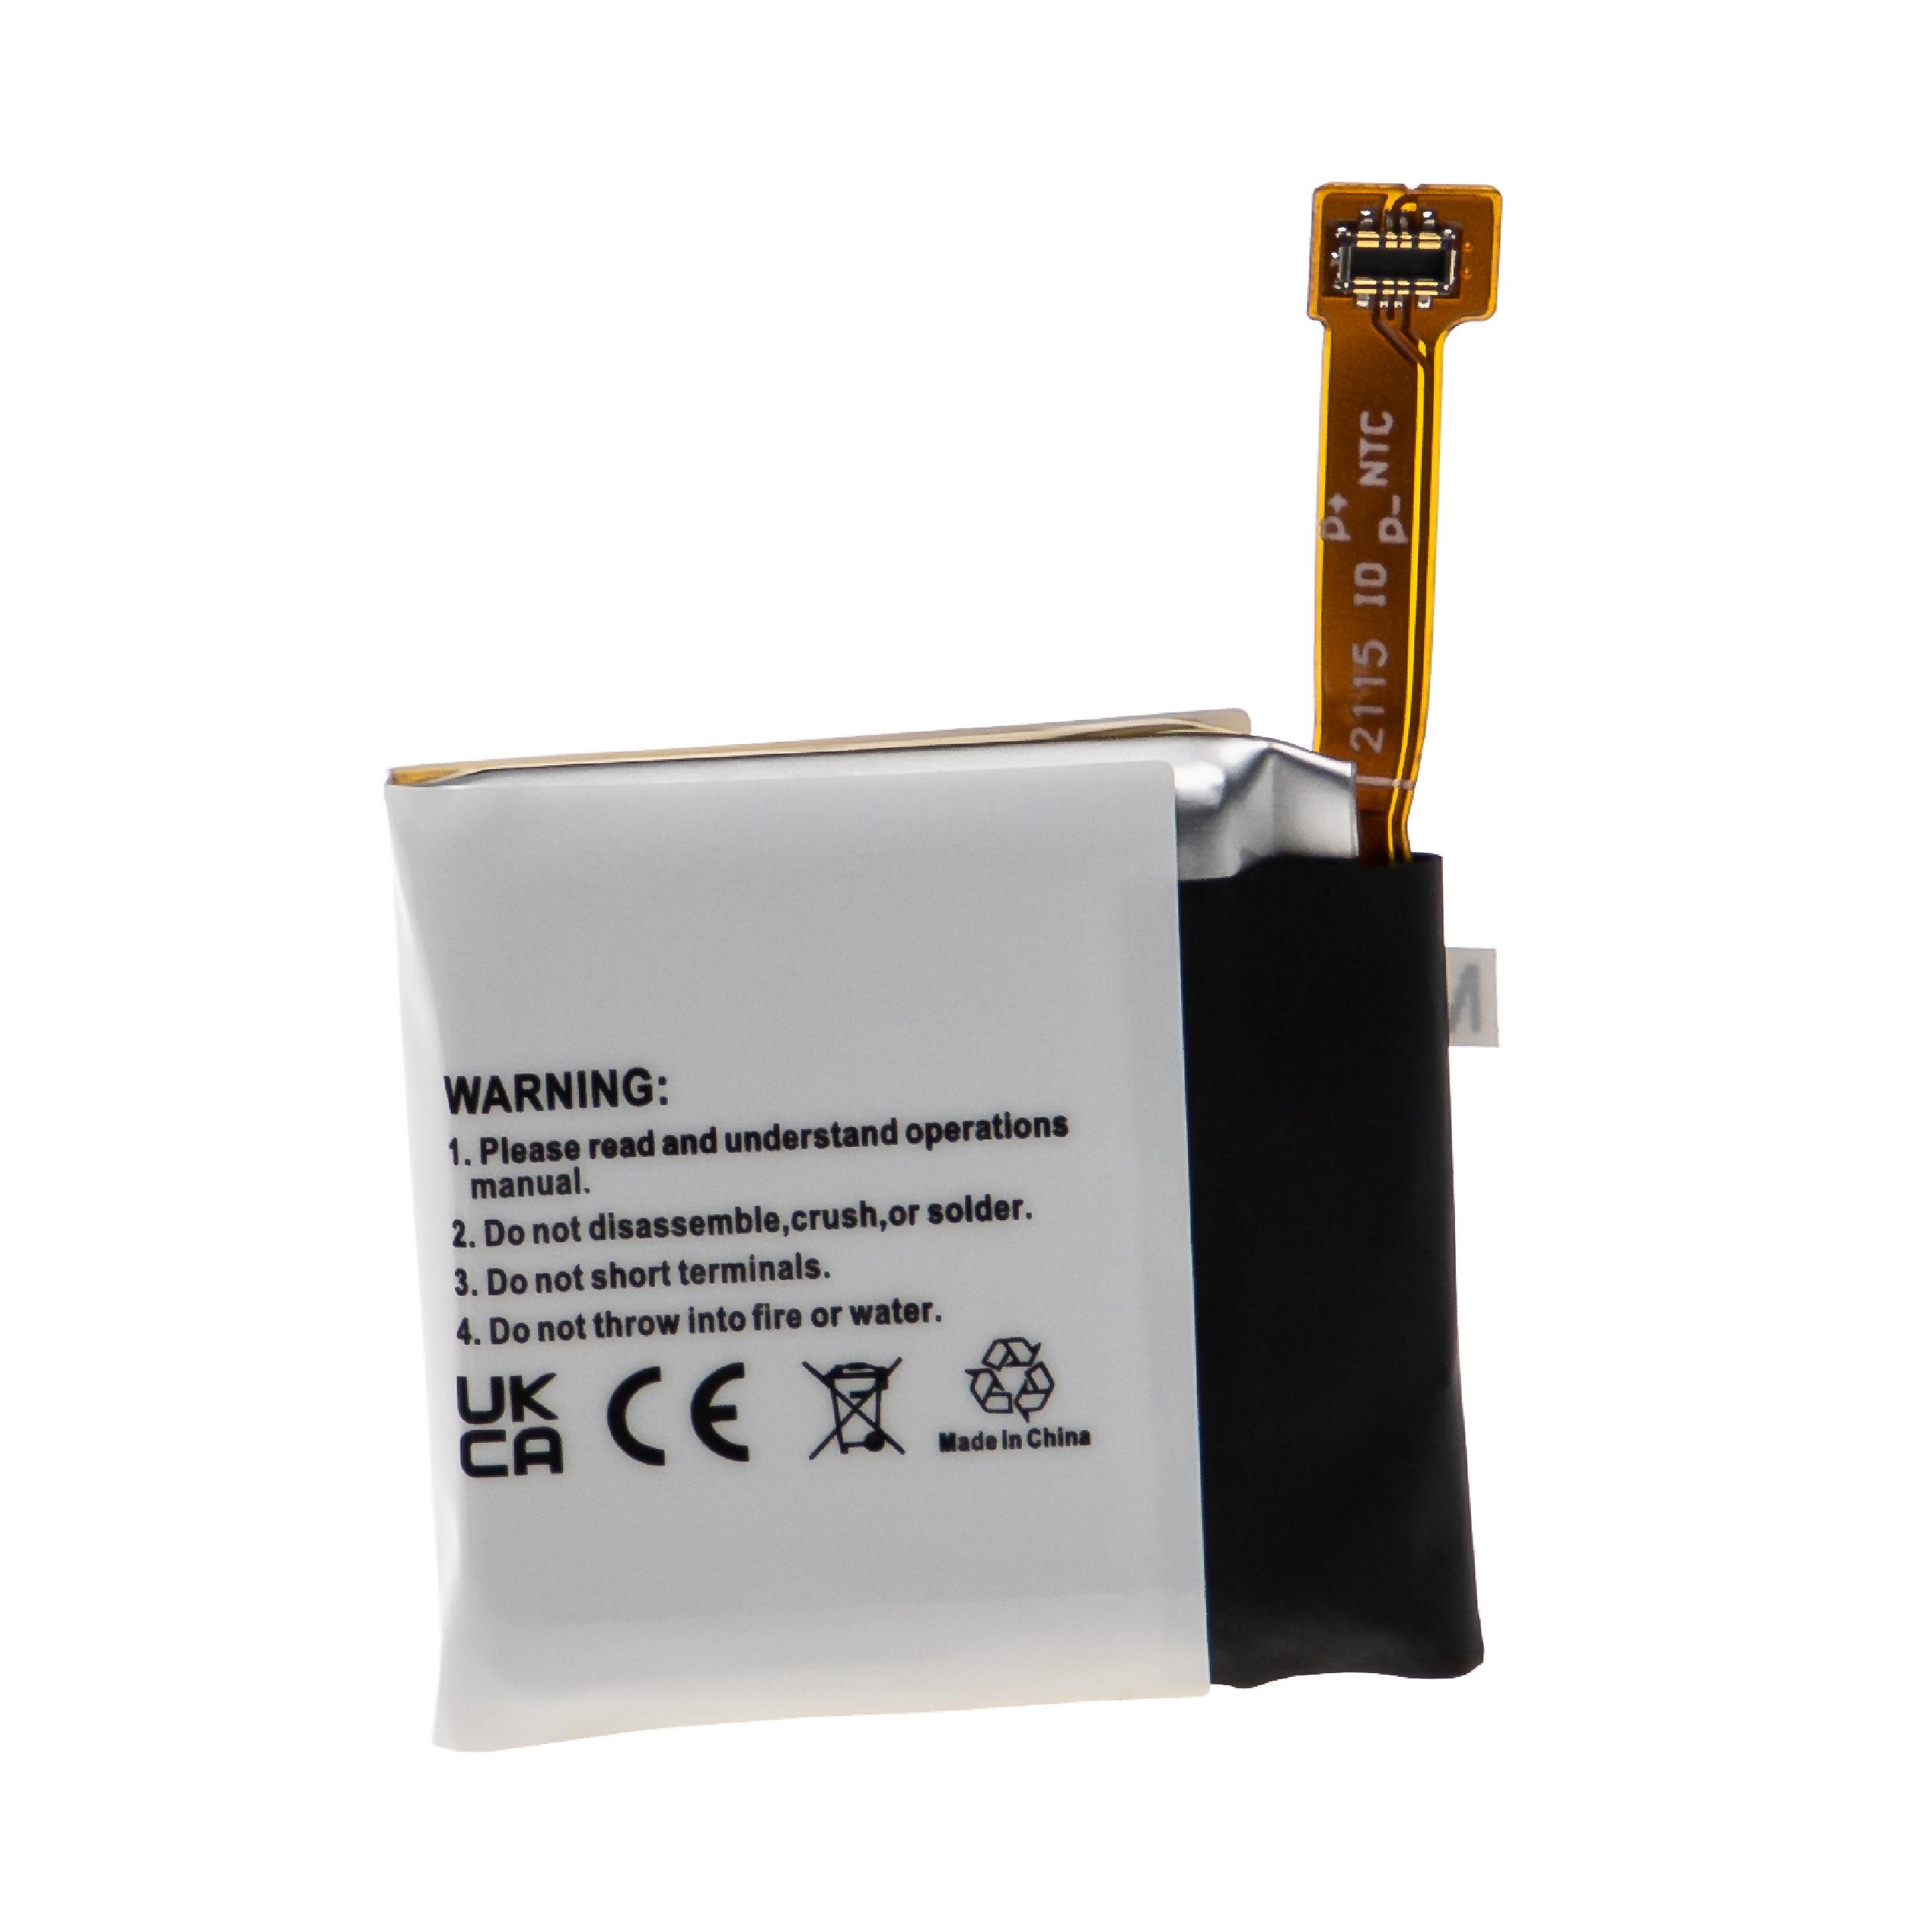 Smartwatch Battery Replacement for TicWatch SP452929SF - 415mAh 3.85V Li-polymer